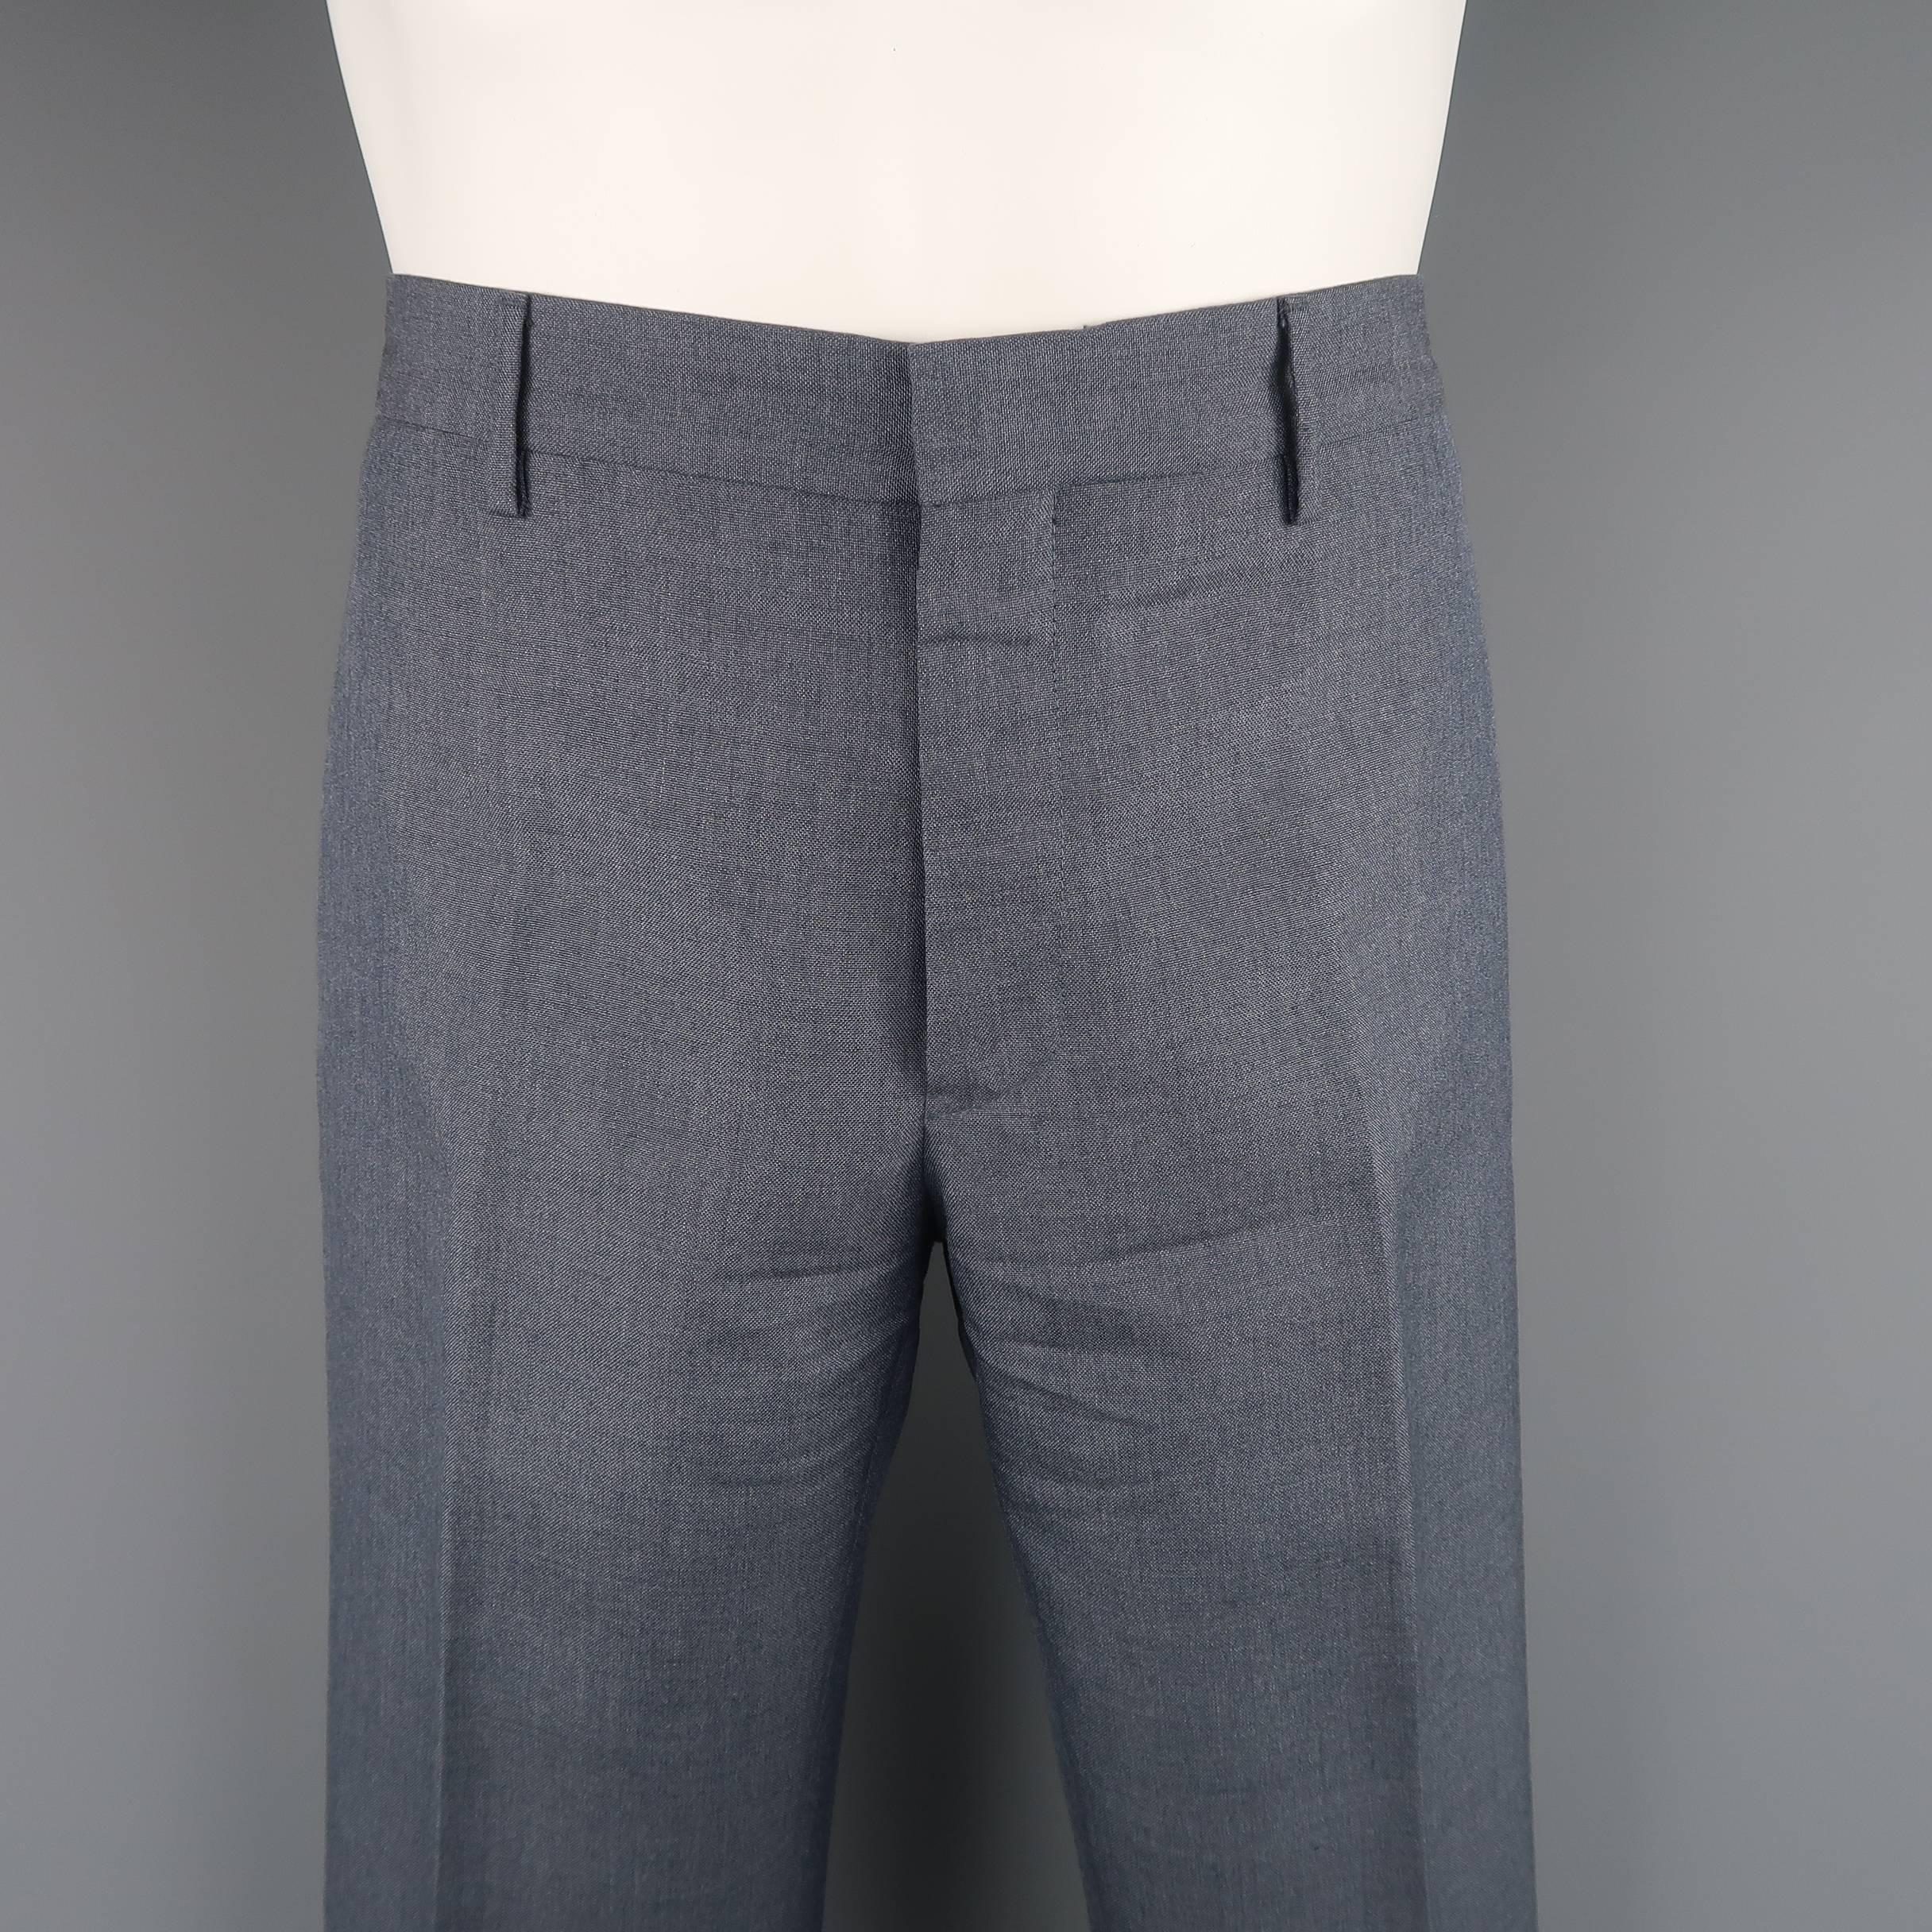 Flat front PRADA dress pants come in steel blue gray mohair wool blend with slit pockets. Made in Italy.
 
Excellent Pre-Owned Condition.
Marked: IT 48
 
Measurements:
 
Waist: 32 in. (+2 in. )
Rise: 9.5 in
Inseam: 30 in. (+2 in. )
 
(Let Out Room)
